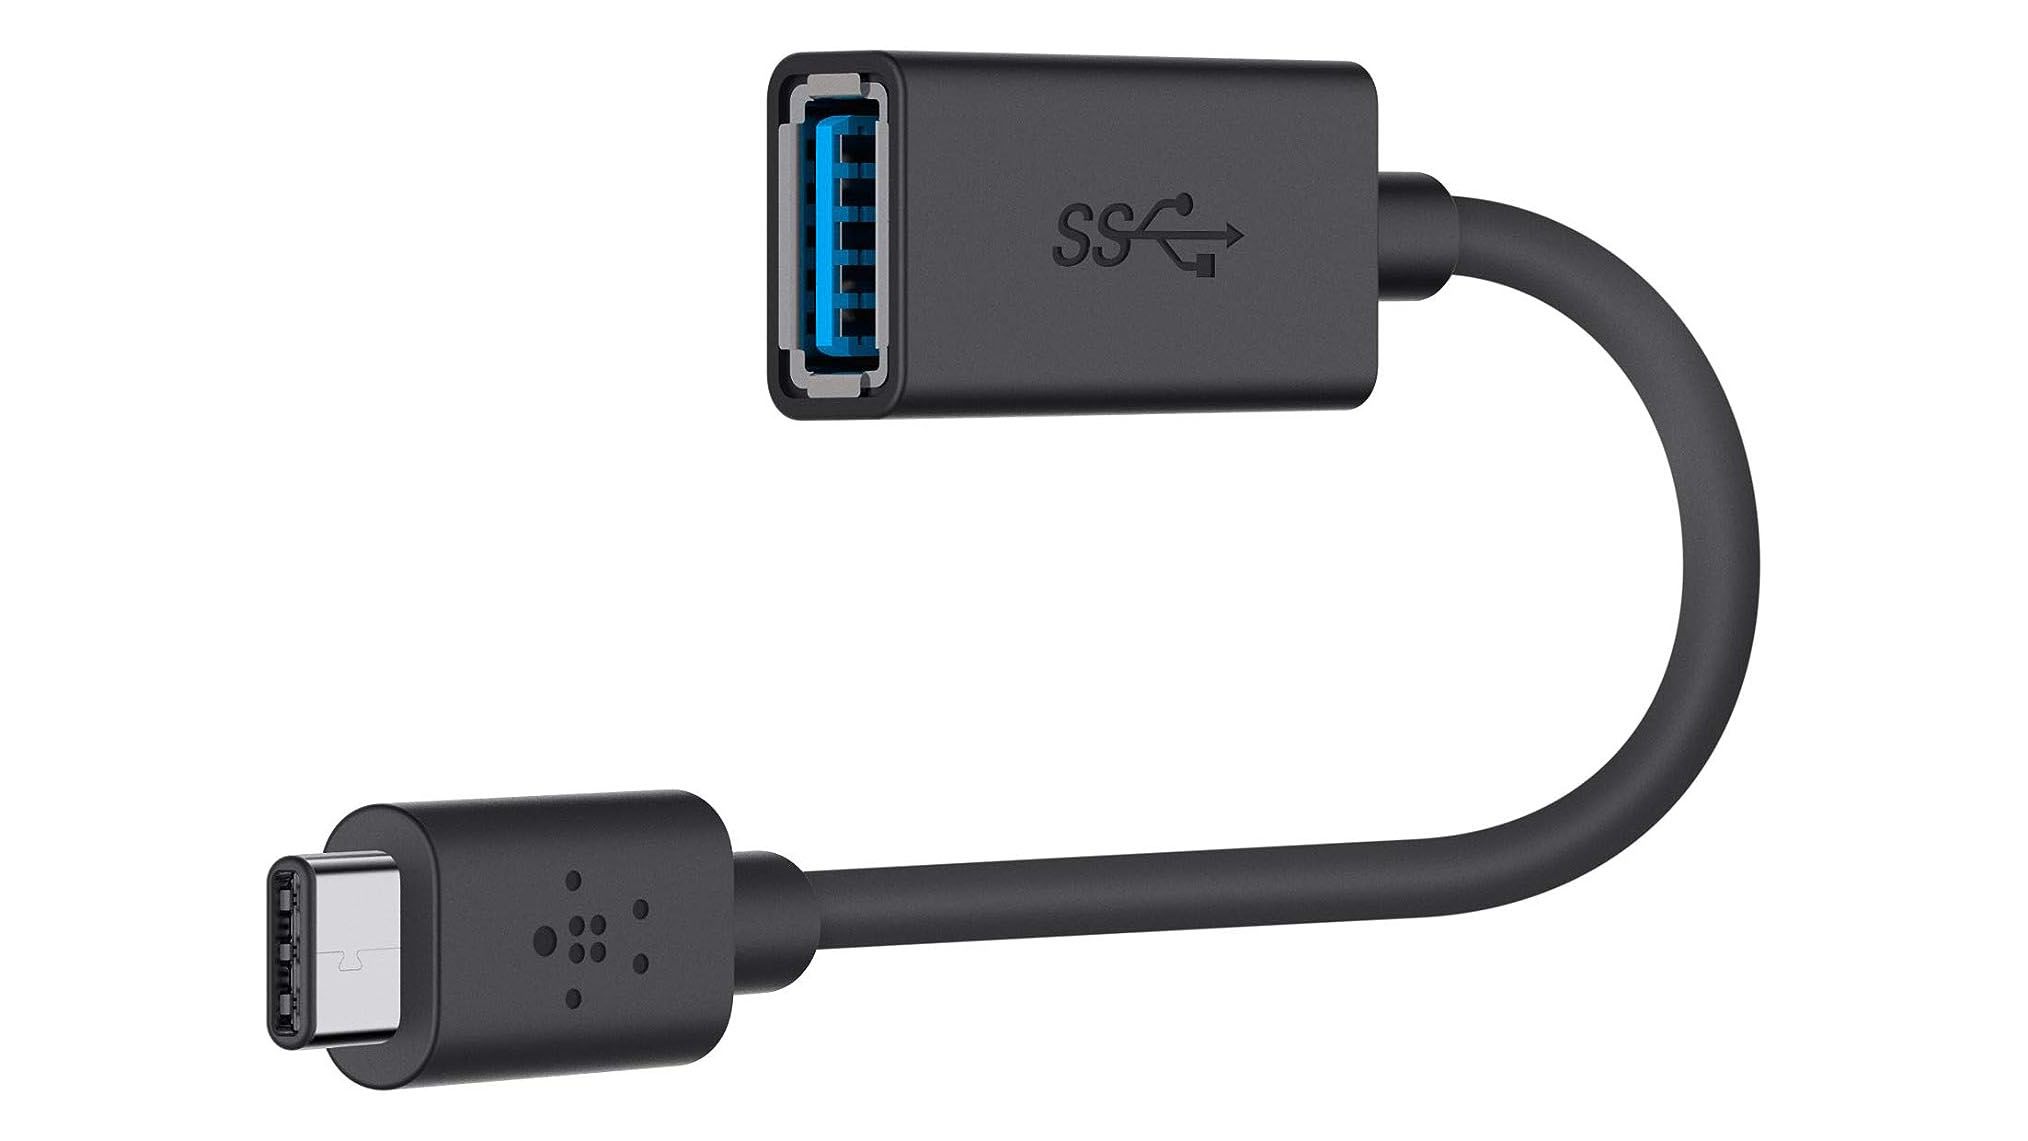 USB-C charging laptops: Here's what you need to know